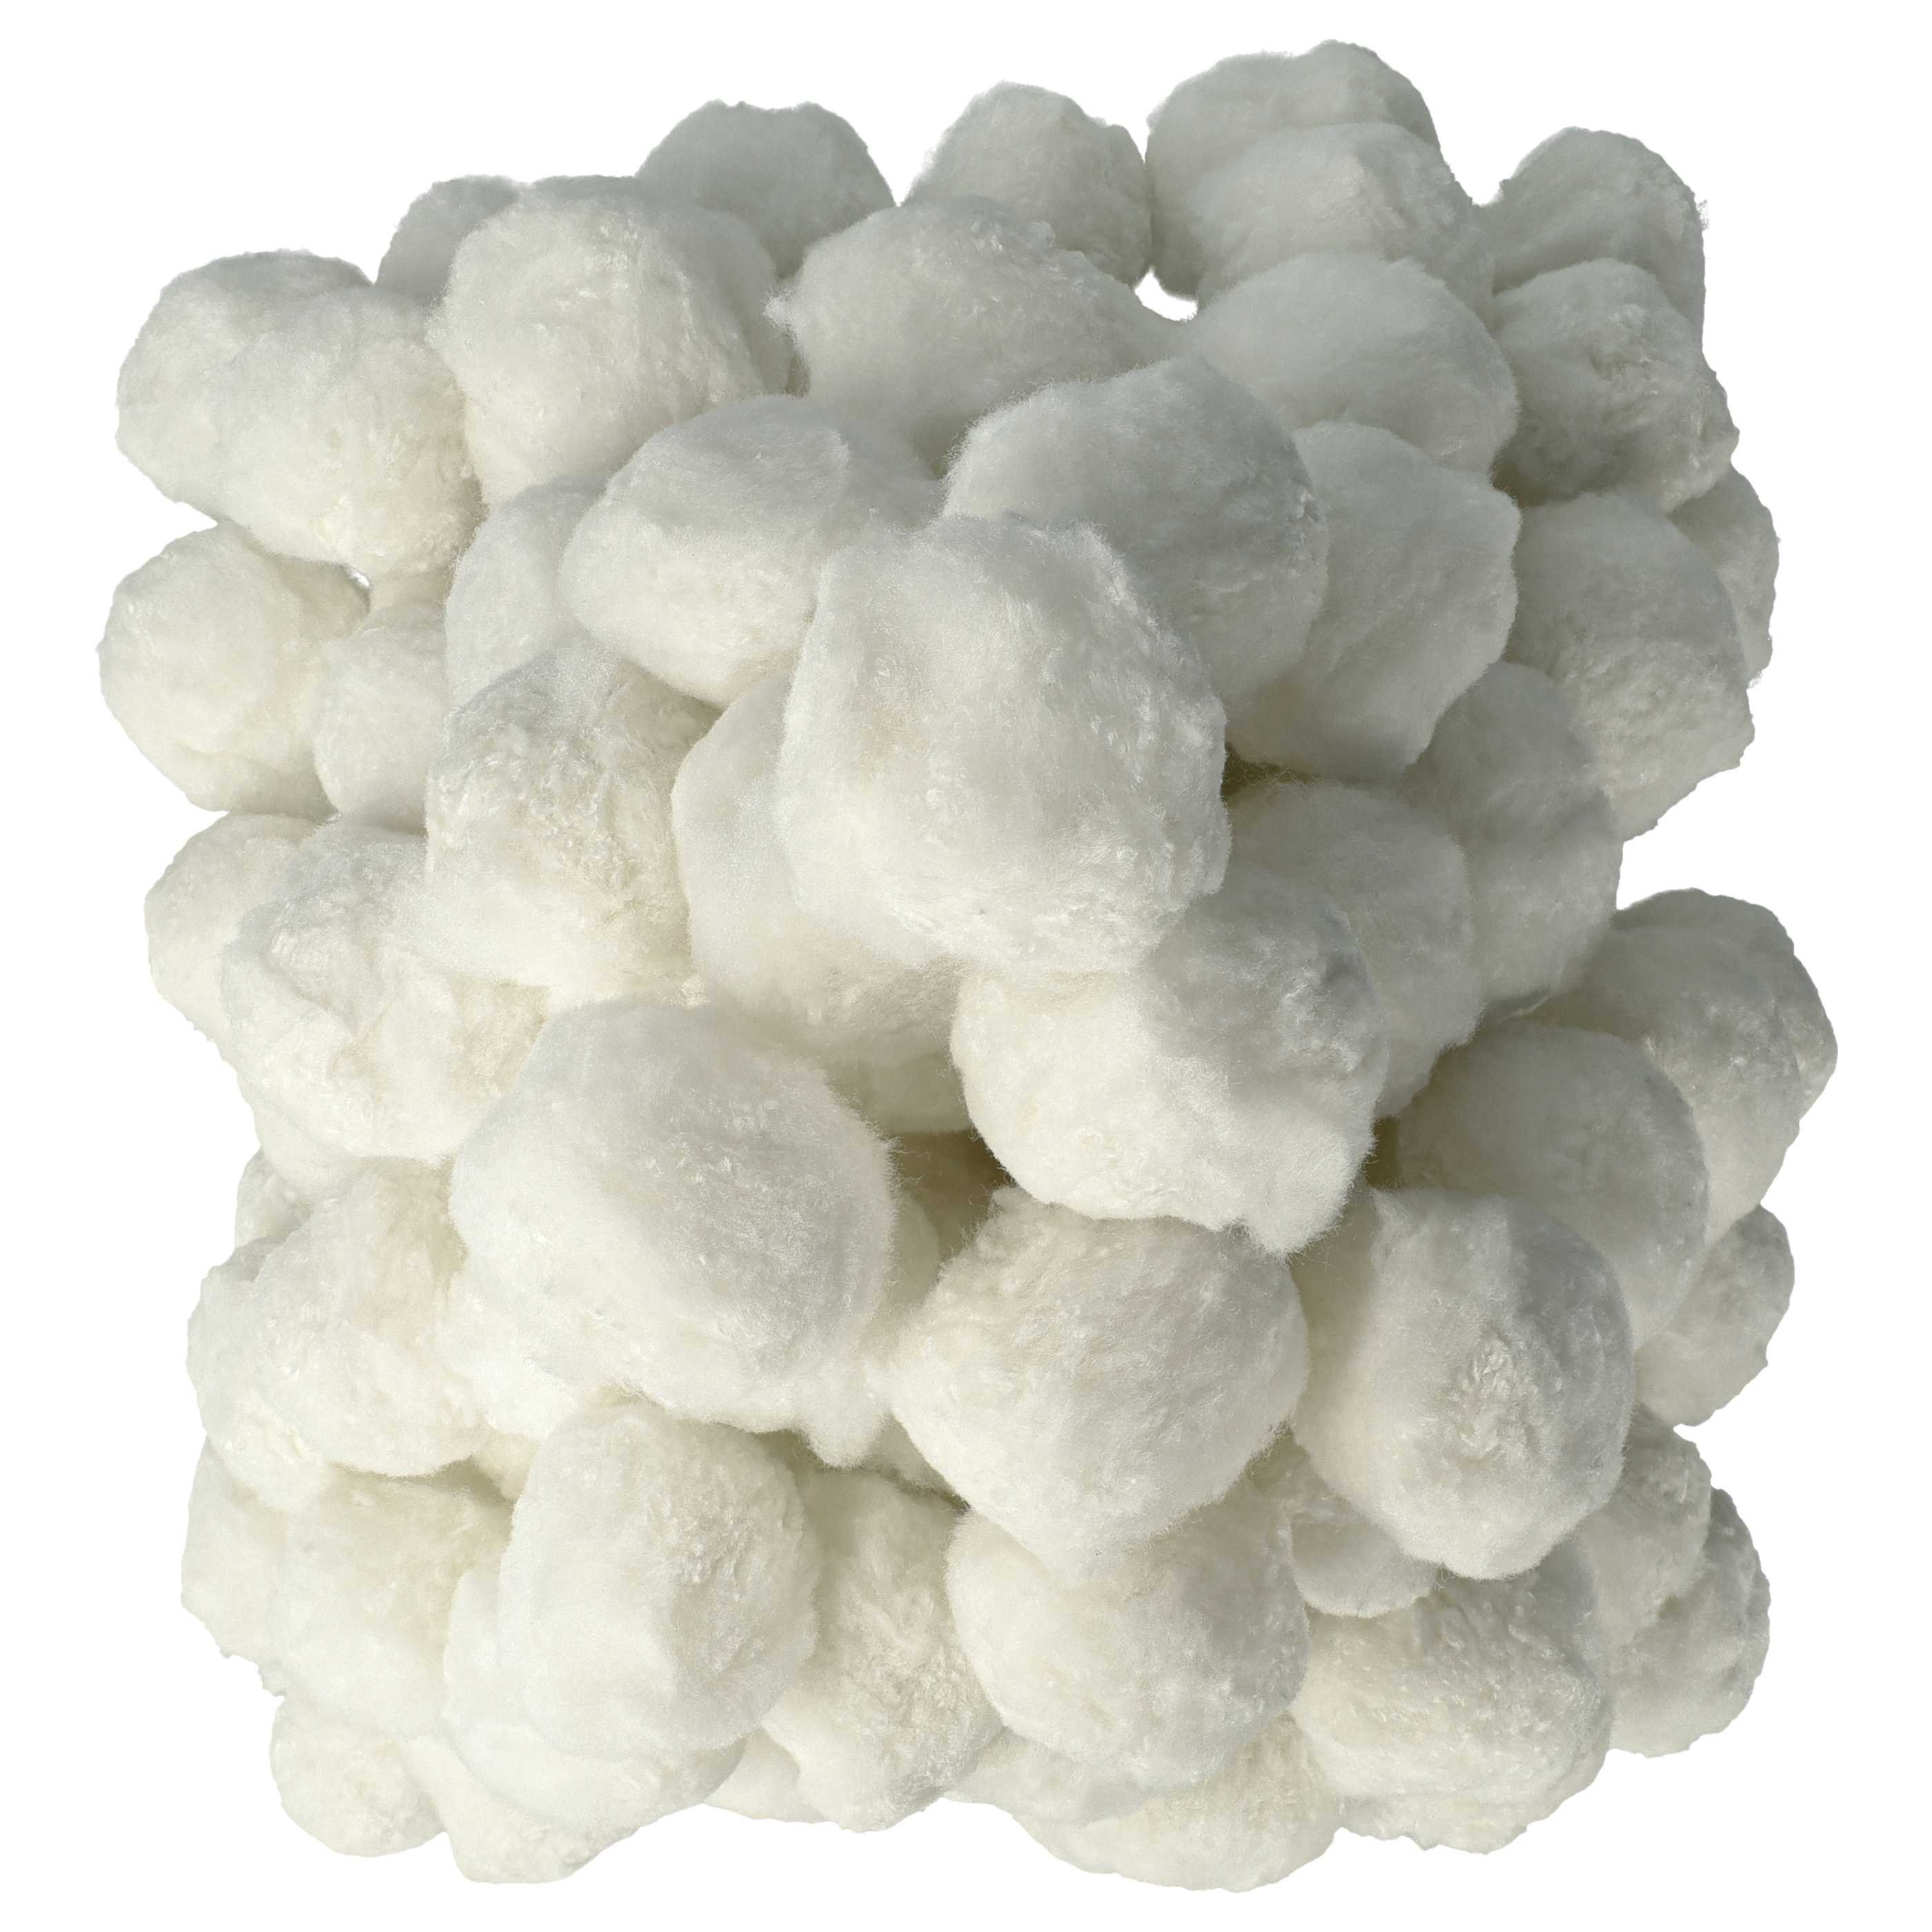 500 g Filter Balls, Packaged replaces Bestway 58475 for Intex Pool Filtration System etc. - 50 mm